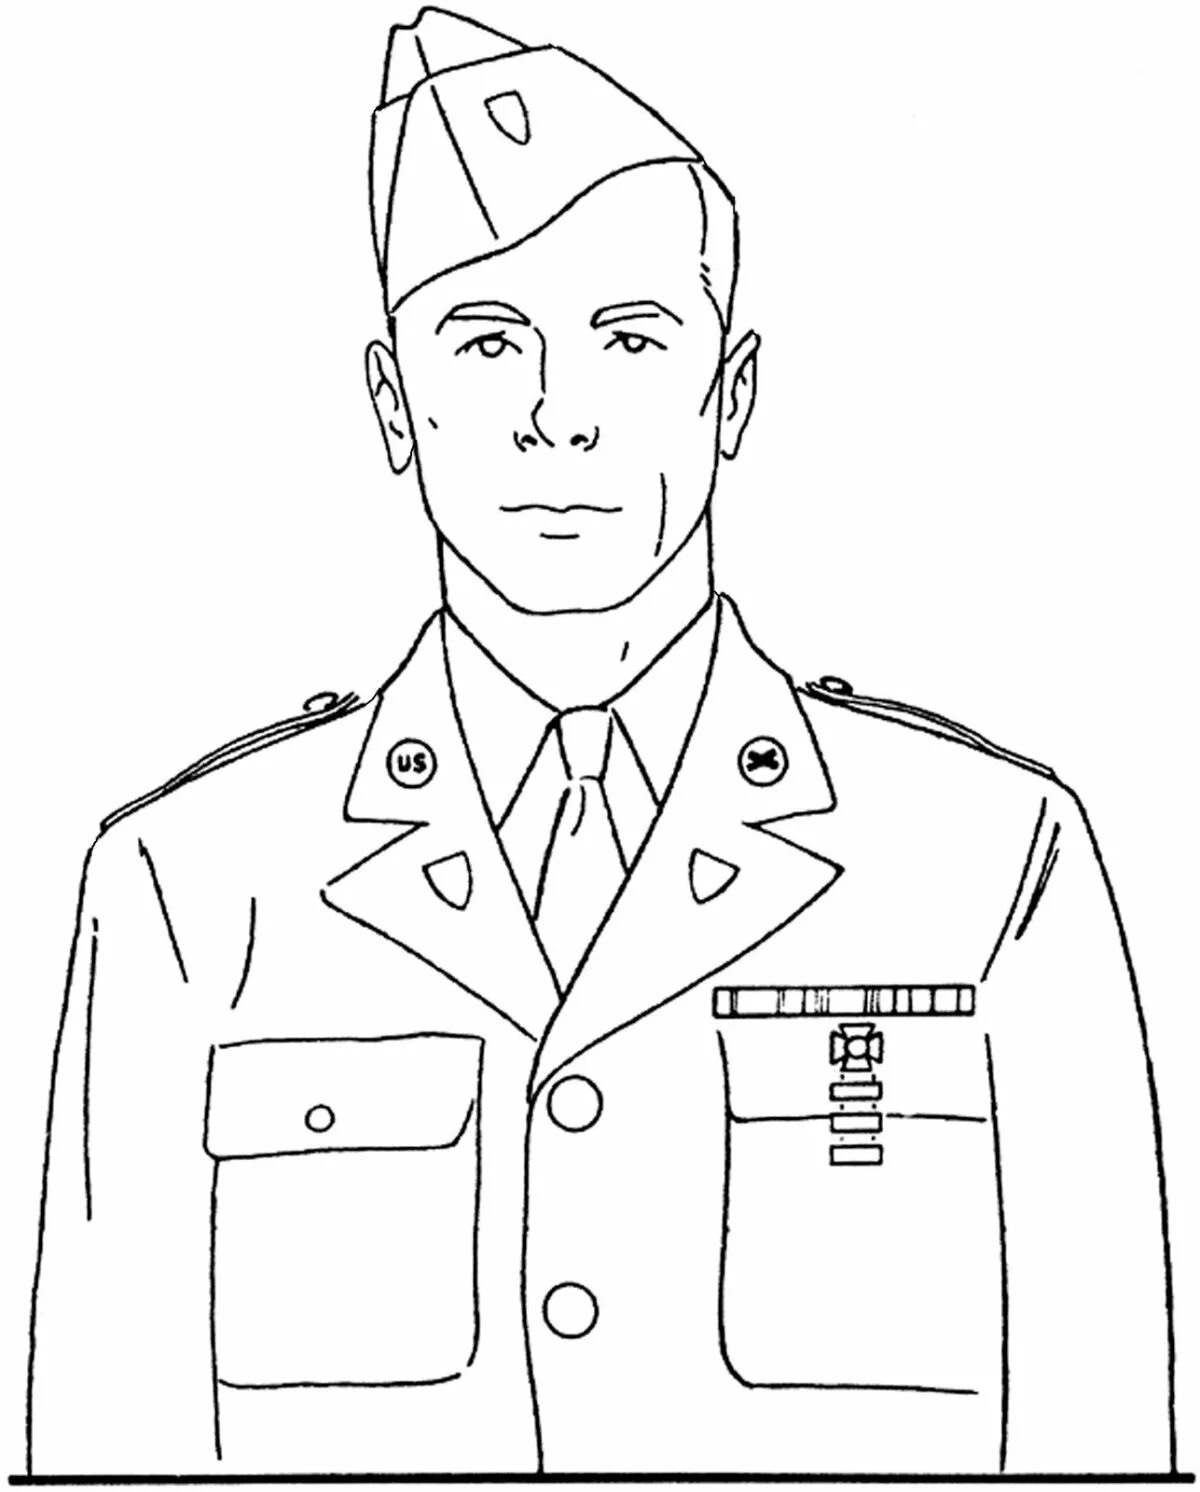 Coloring page dazzling hero soldier